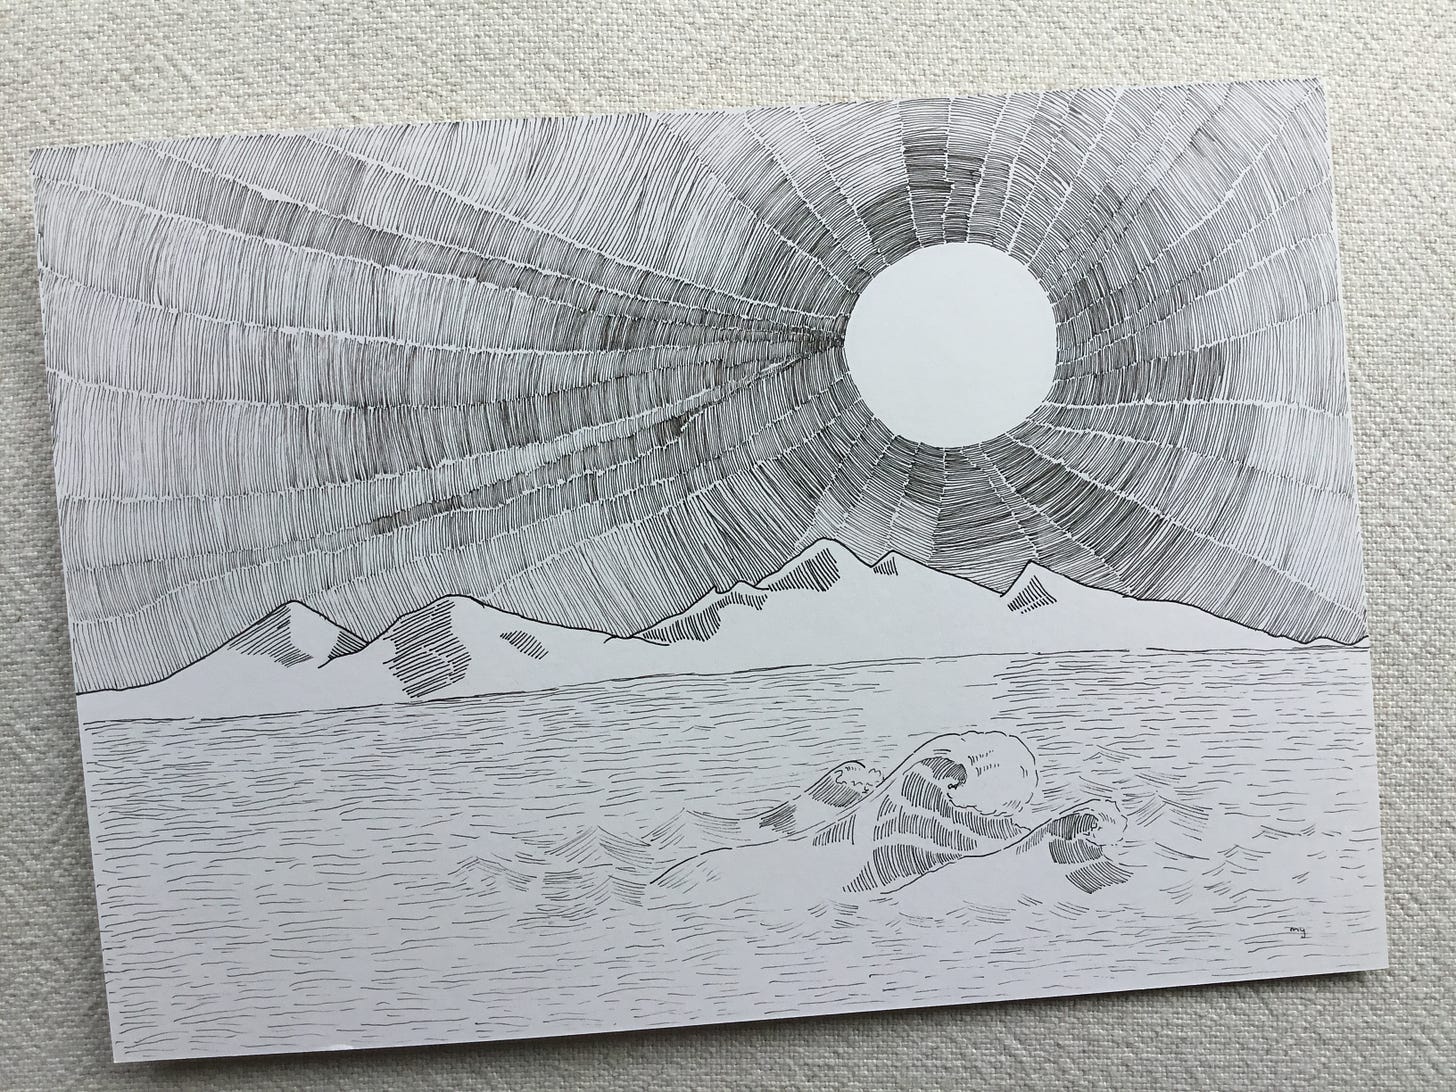 image: photo of my completed line drawing artwork of In Its Place. A landscape drawing of a majestic scene of the sun with intricate lines as sun ray, front by the mountain, and ocean with a rolling wave.